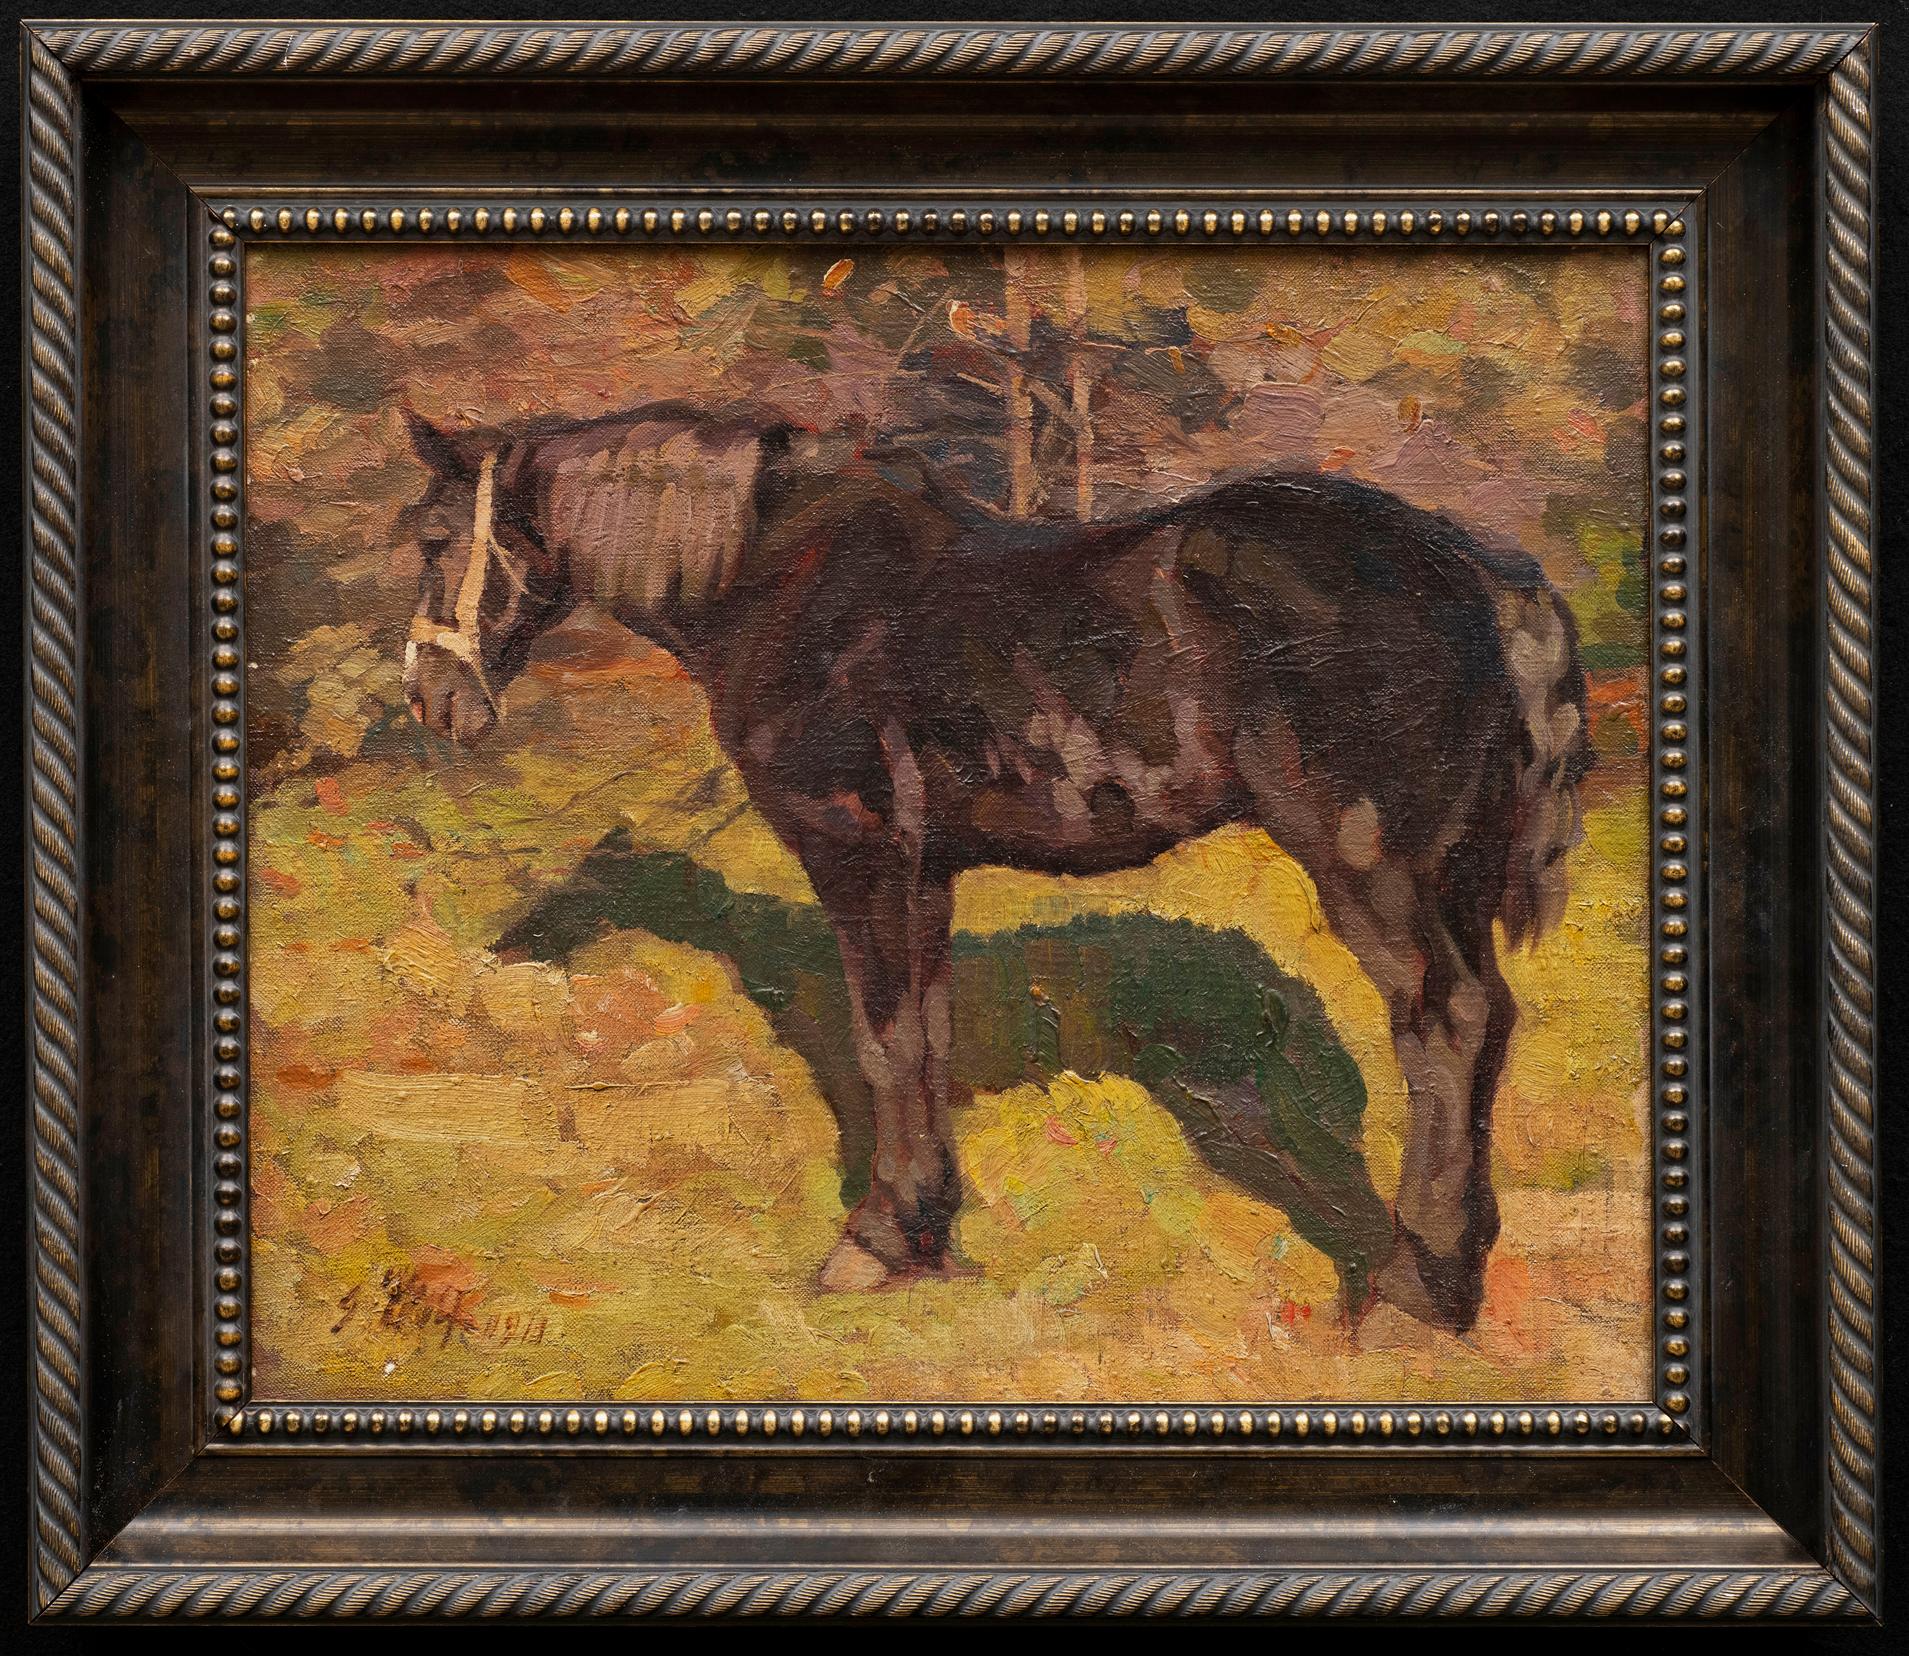 Antique Horse Painting "Standing Horse in Pasture" dated 1911